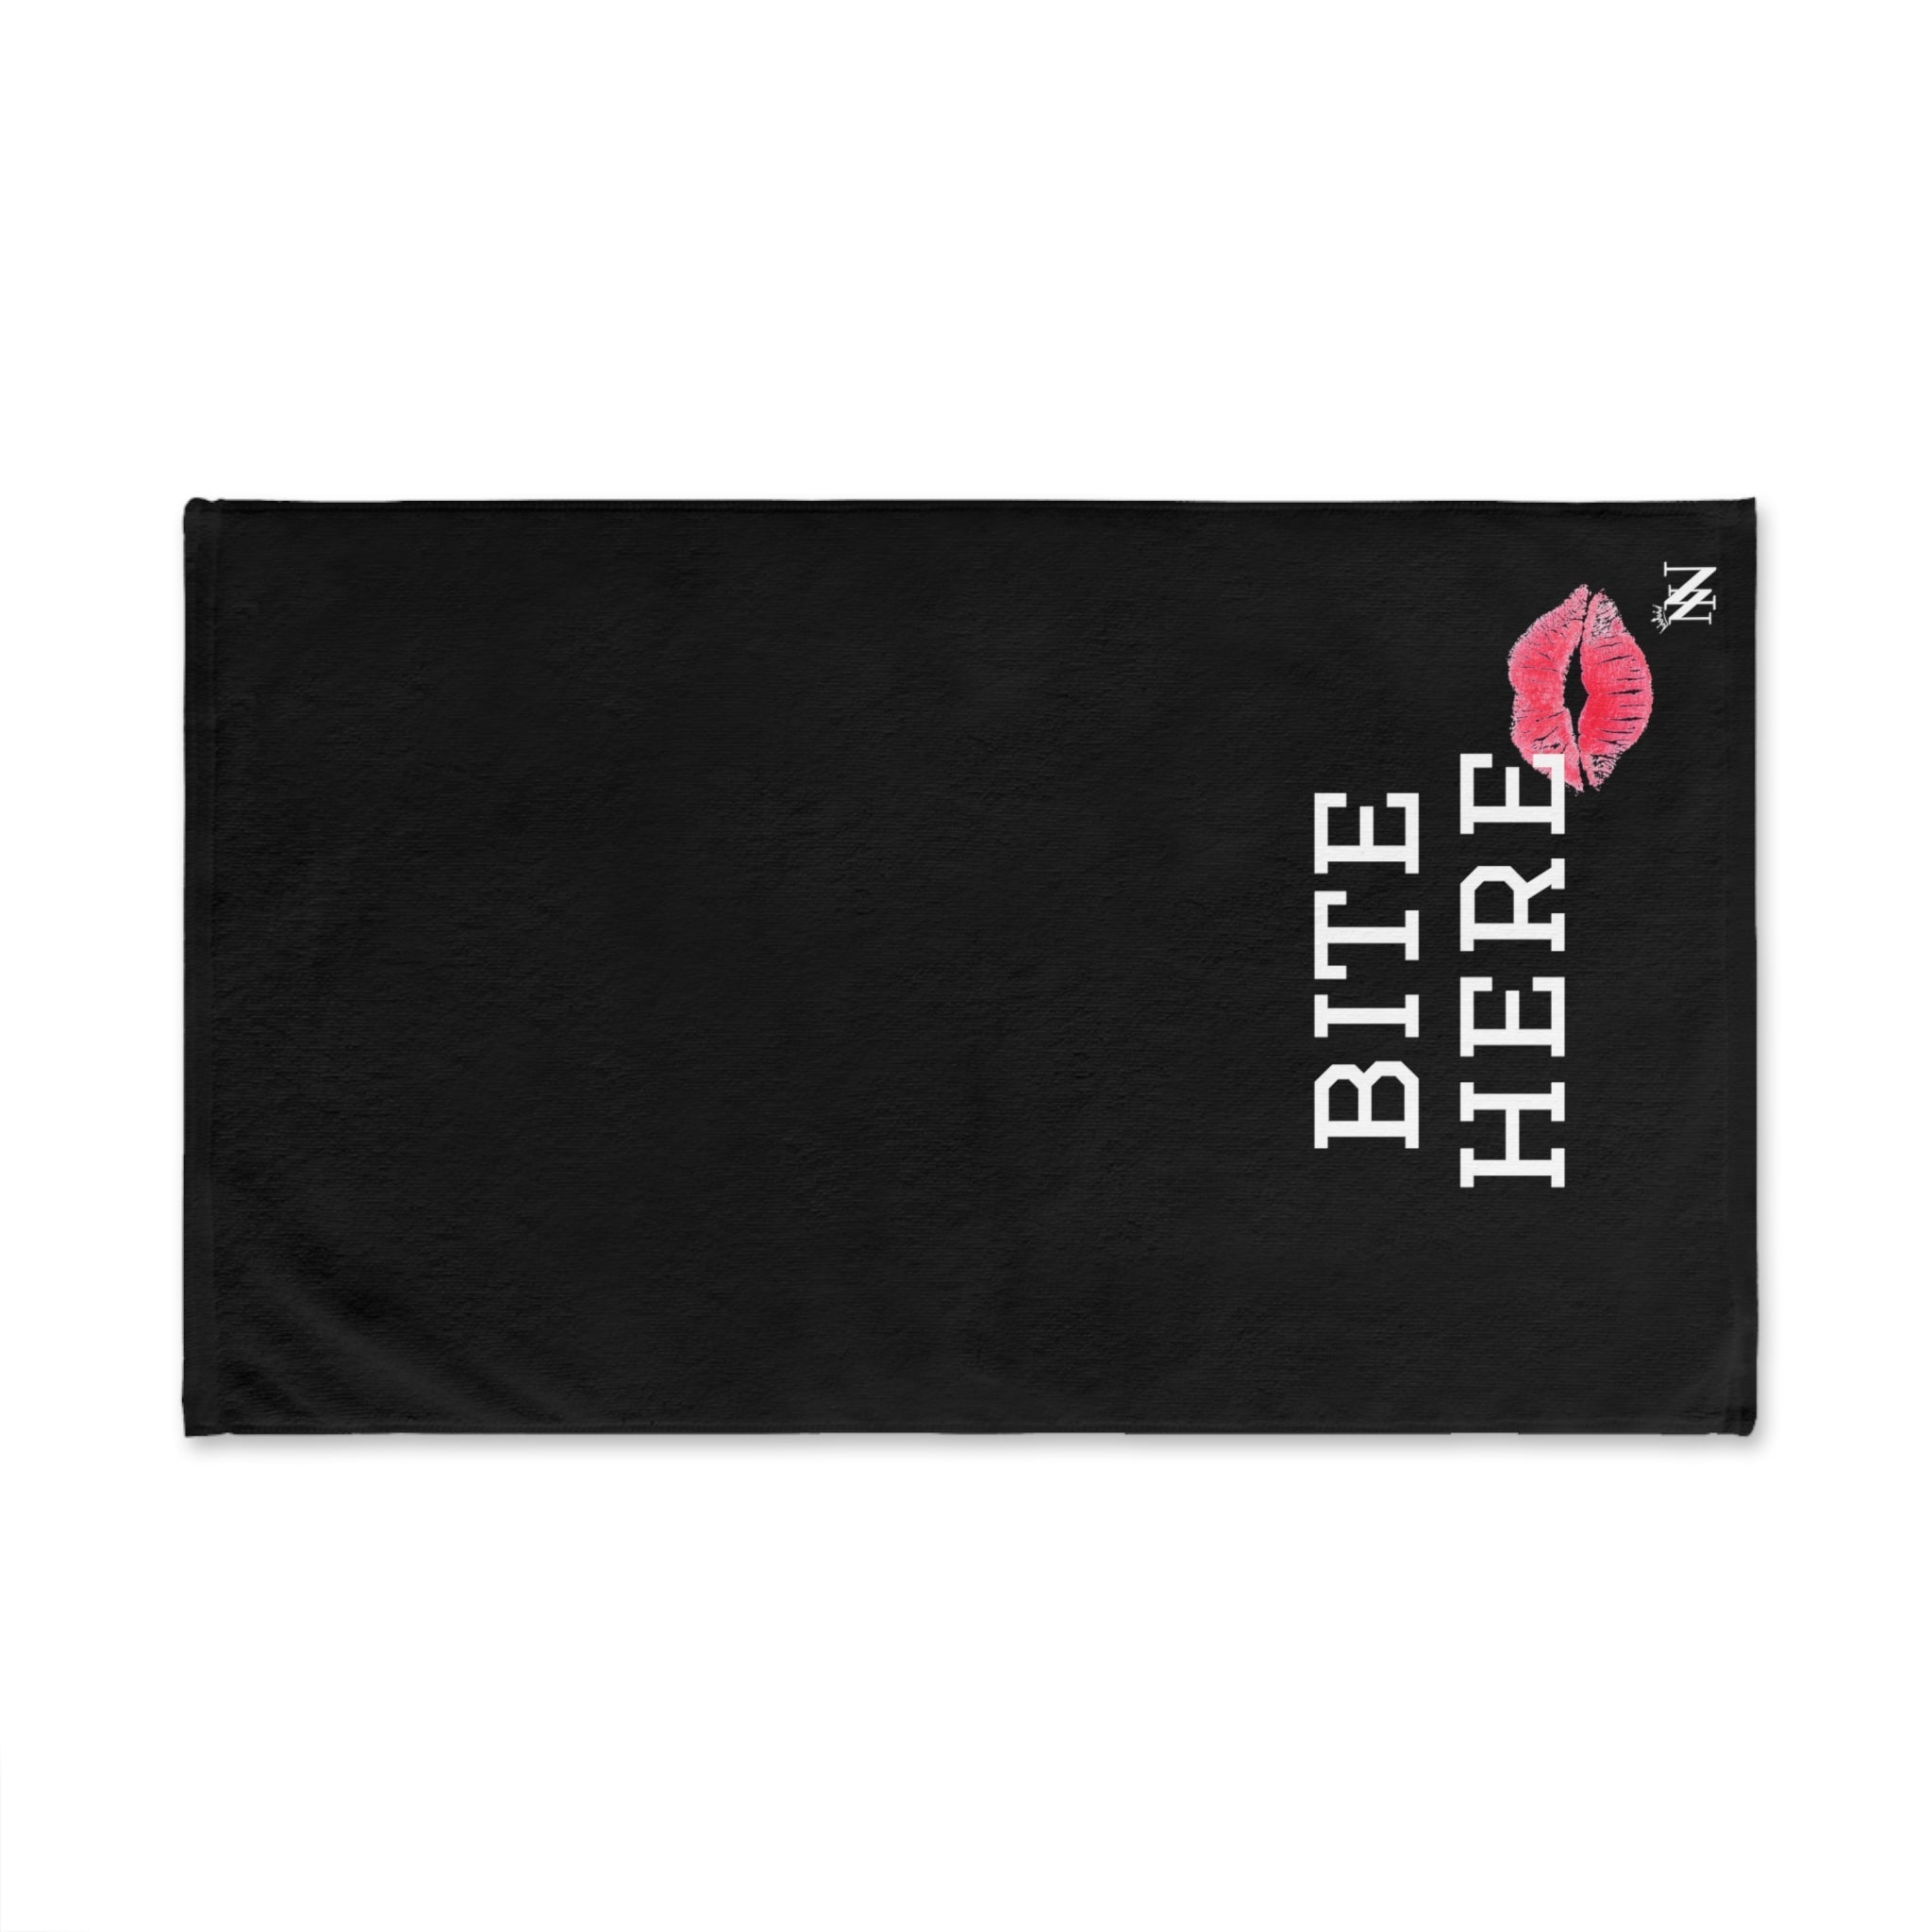 Cheer Bite Here Black | Sexy Gifts for Boyfriend, Funny Towel Romantic Gift for Wedding Couple Fiance First Year 2nd Anniversary Valentines, Party Gag Gifts, Joke Humor Cloth for Husband Men BF NECTAR NAPKINS